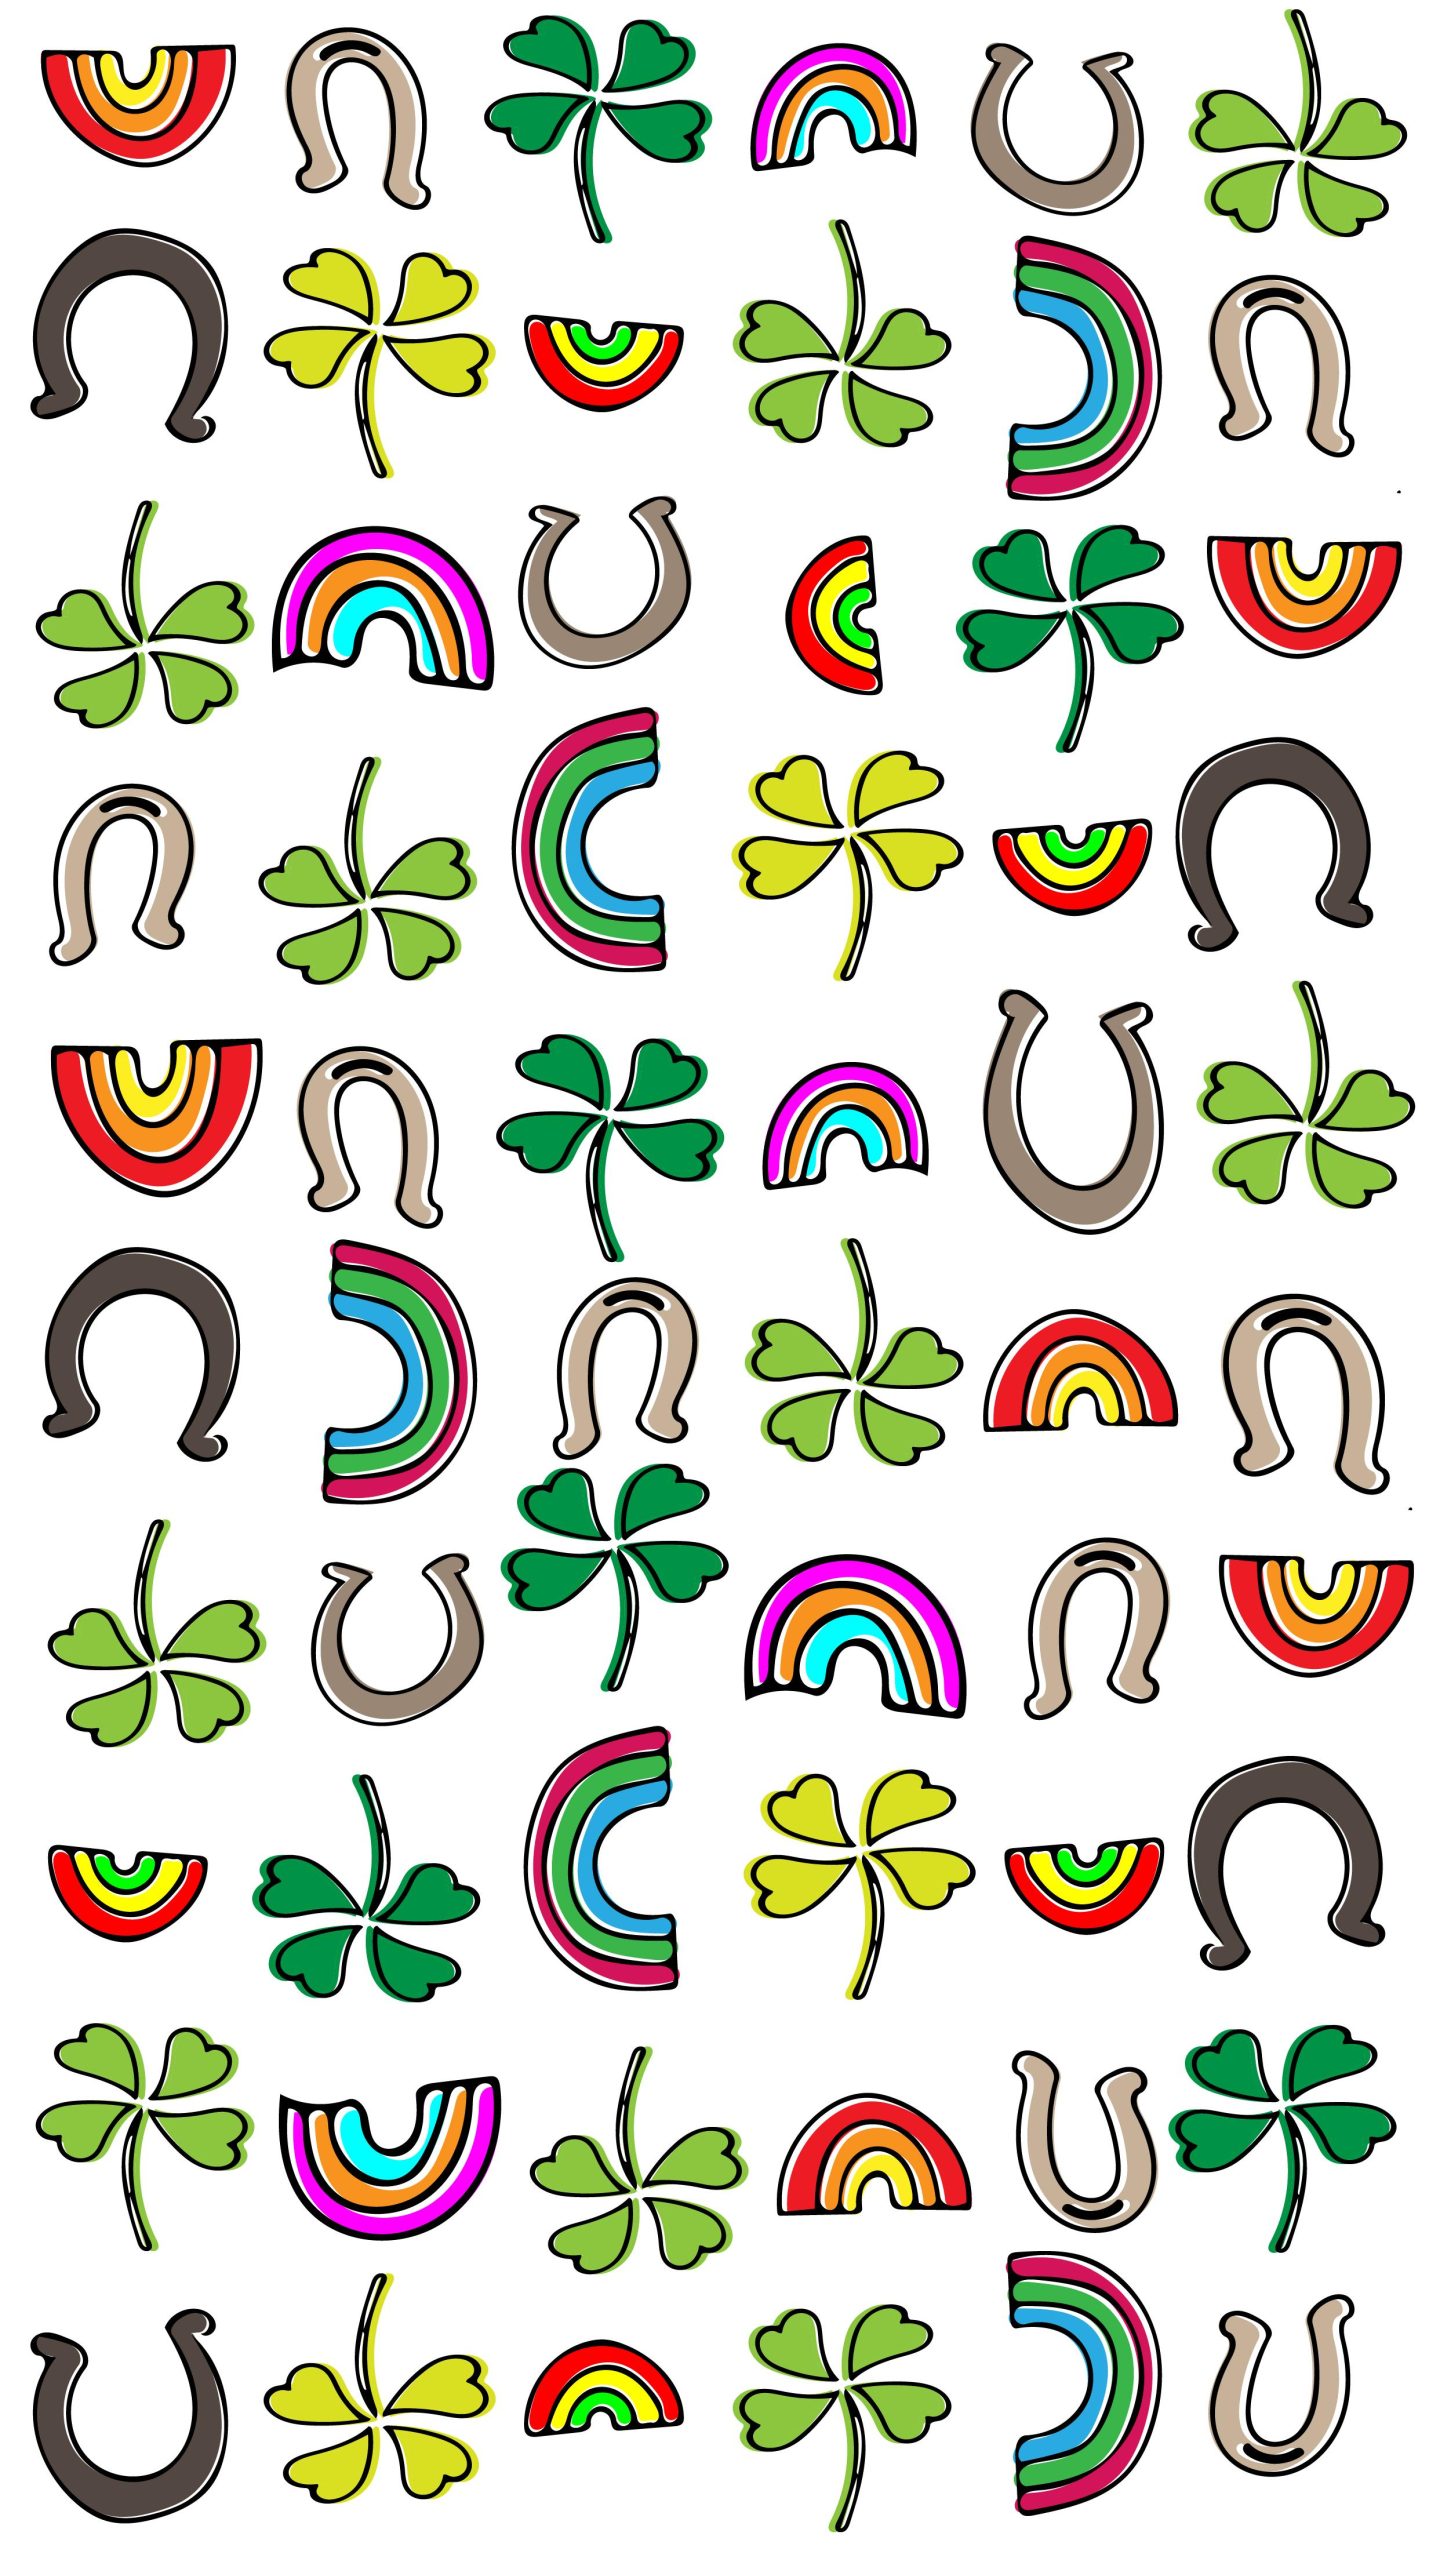 St Patrick’s Day iPhone 1080p Wallpaper, St Patrick’s Day iPhone, Anime